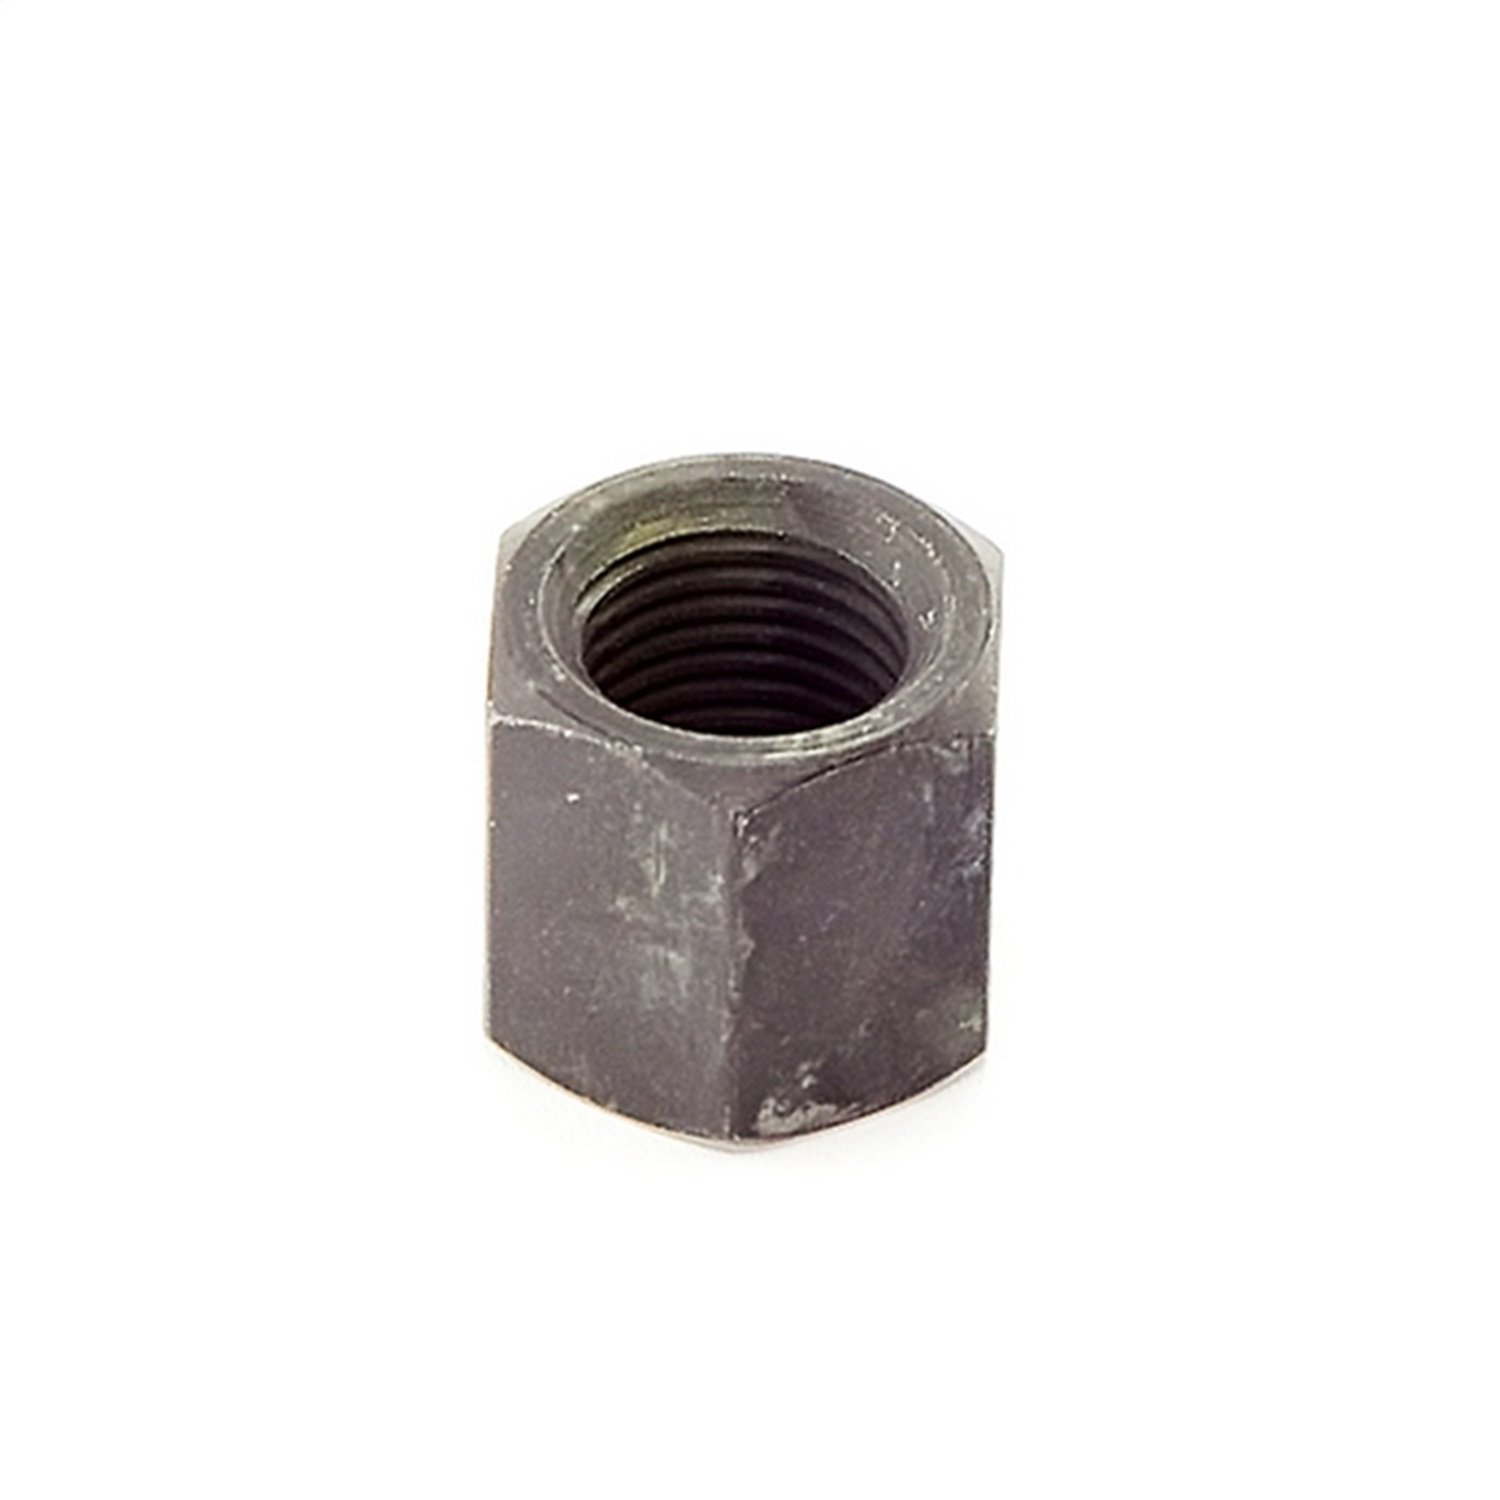 This long U-bolt nut from Omix ADA fits 41-71 Willys and Jeep models. Two required per U-bolt.